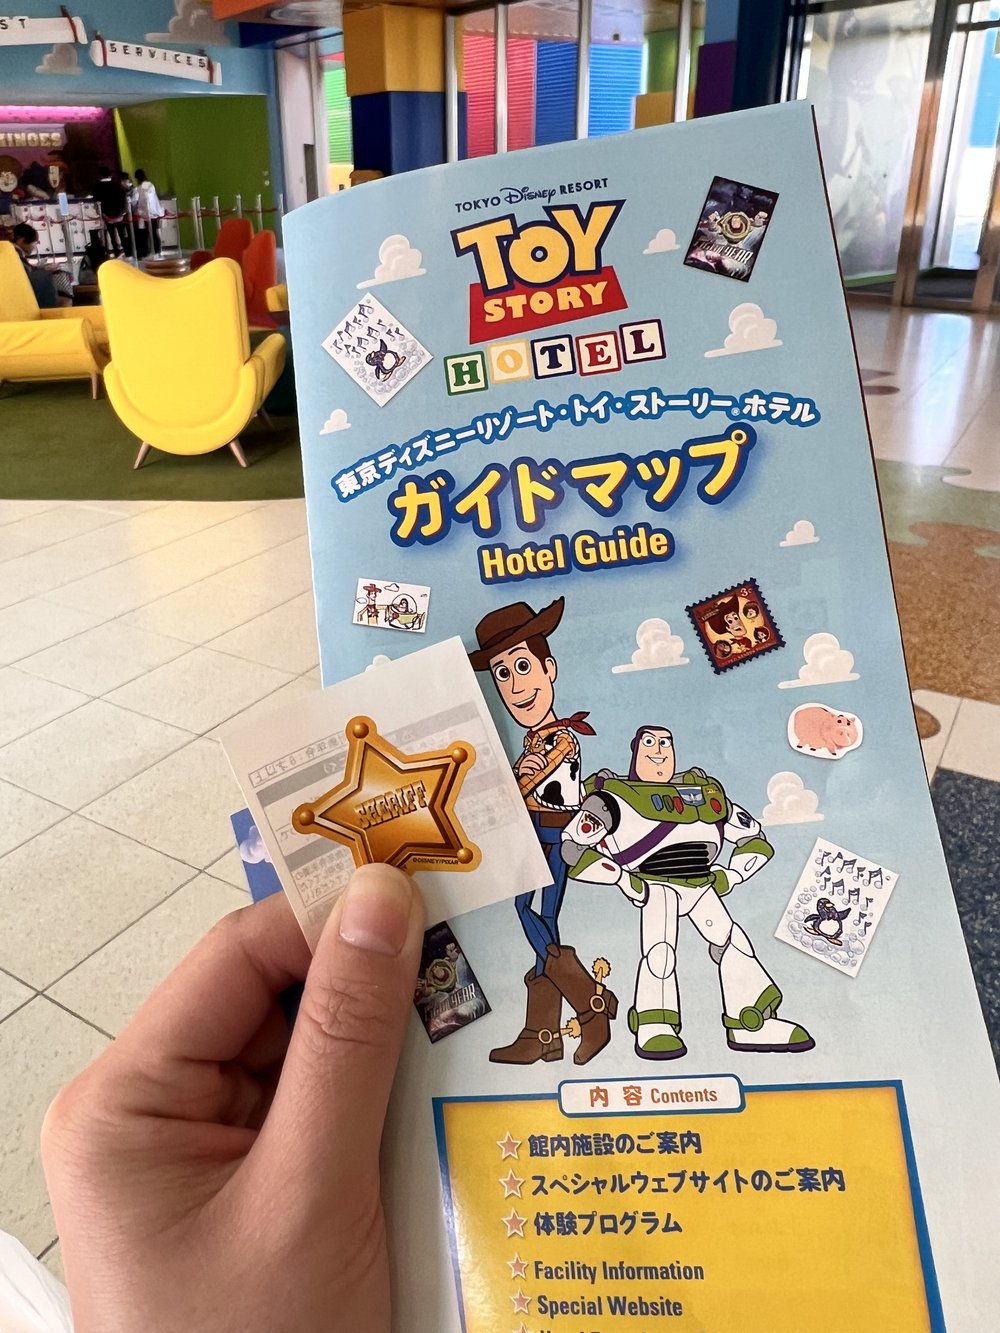  Toy Story hotel guide with a Sheriff sticker 